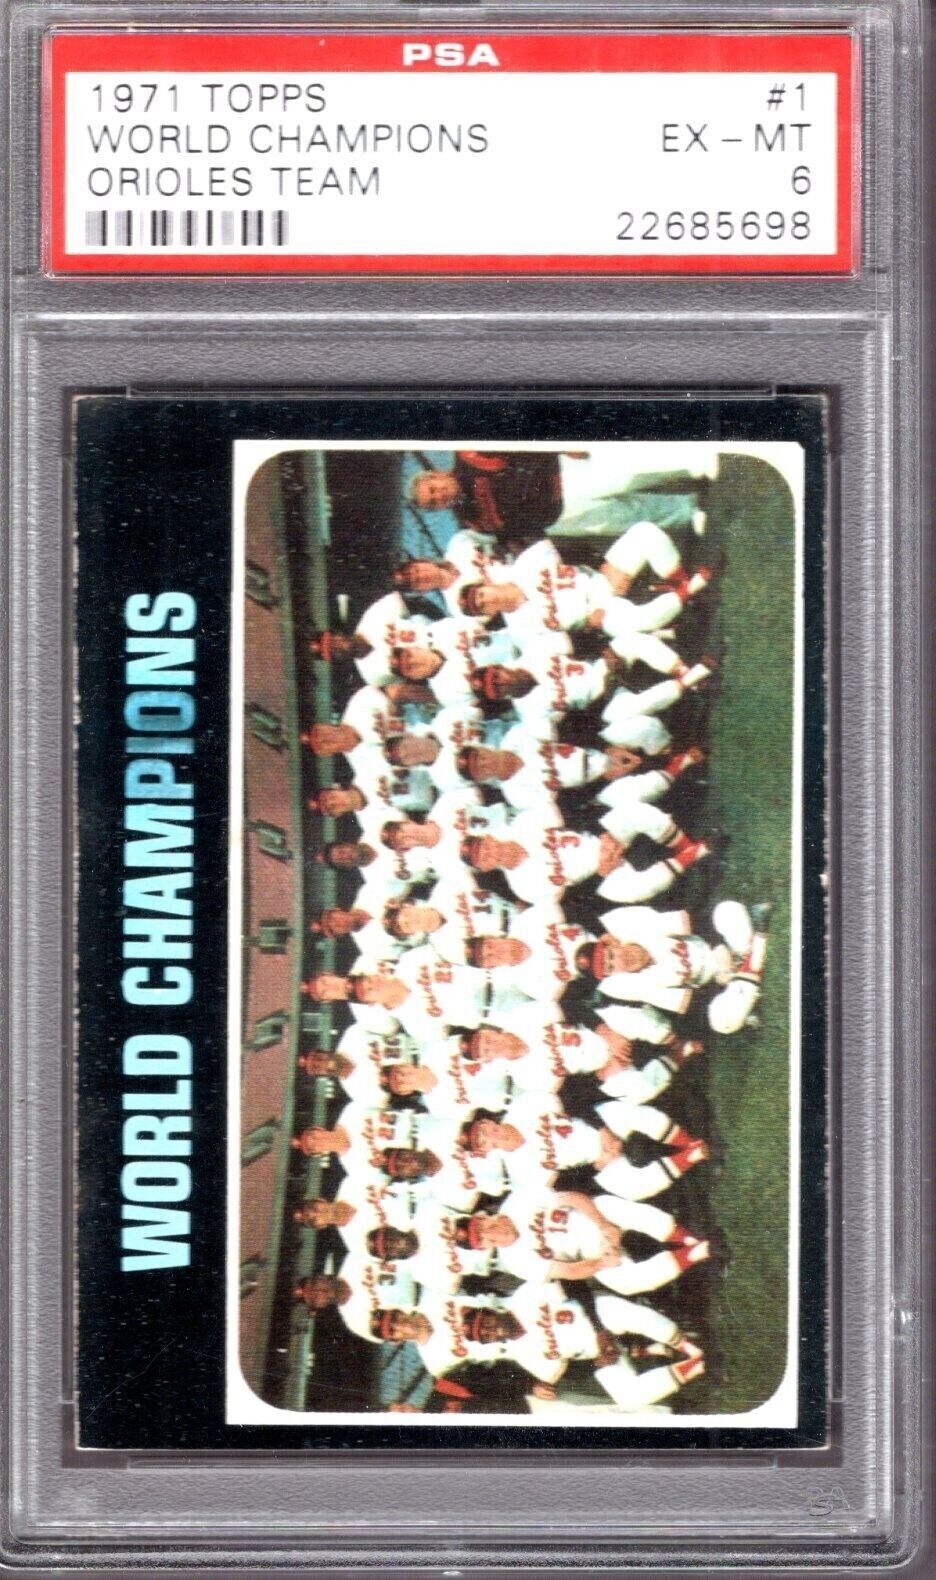 Primary image for 1971 TOPPS #1 WORLD CHAMPIONS BALTIMORE ORIOLES PSA 6! JIM PALMER FRANK ROBINSON